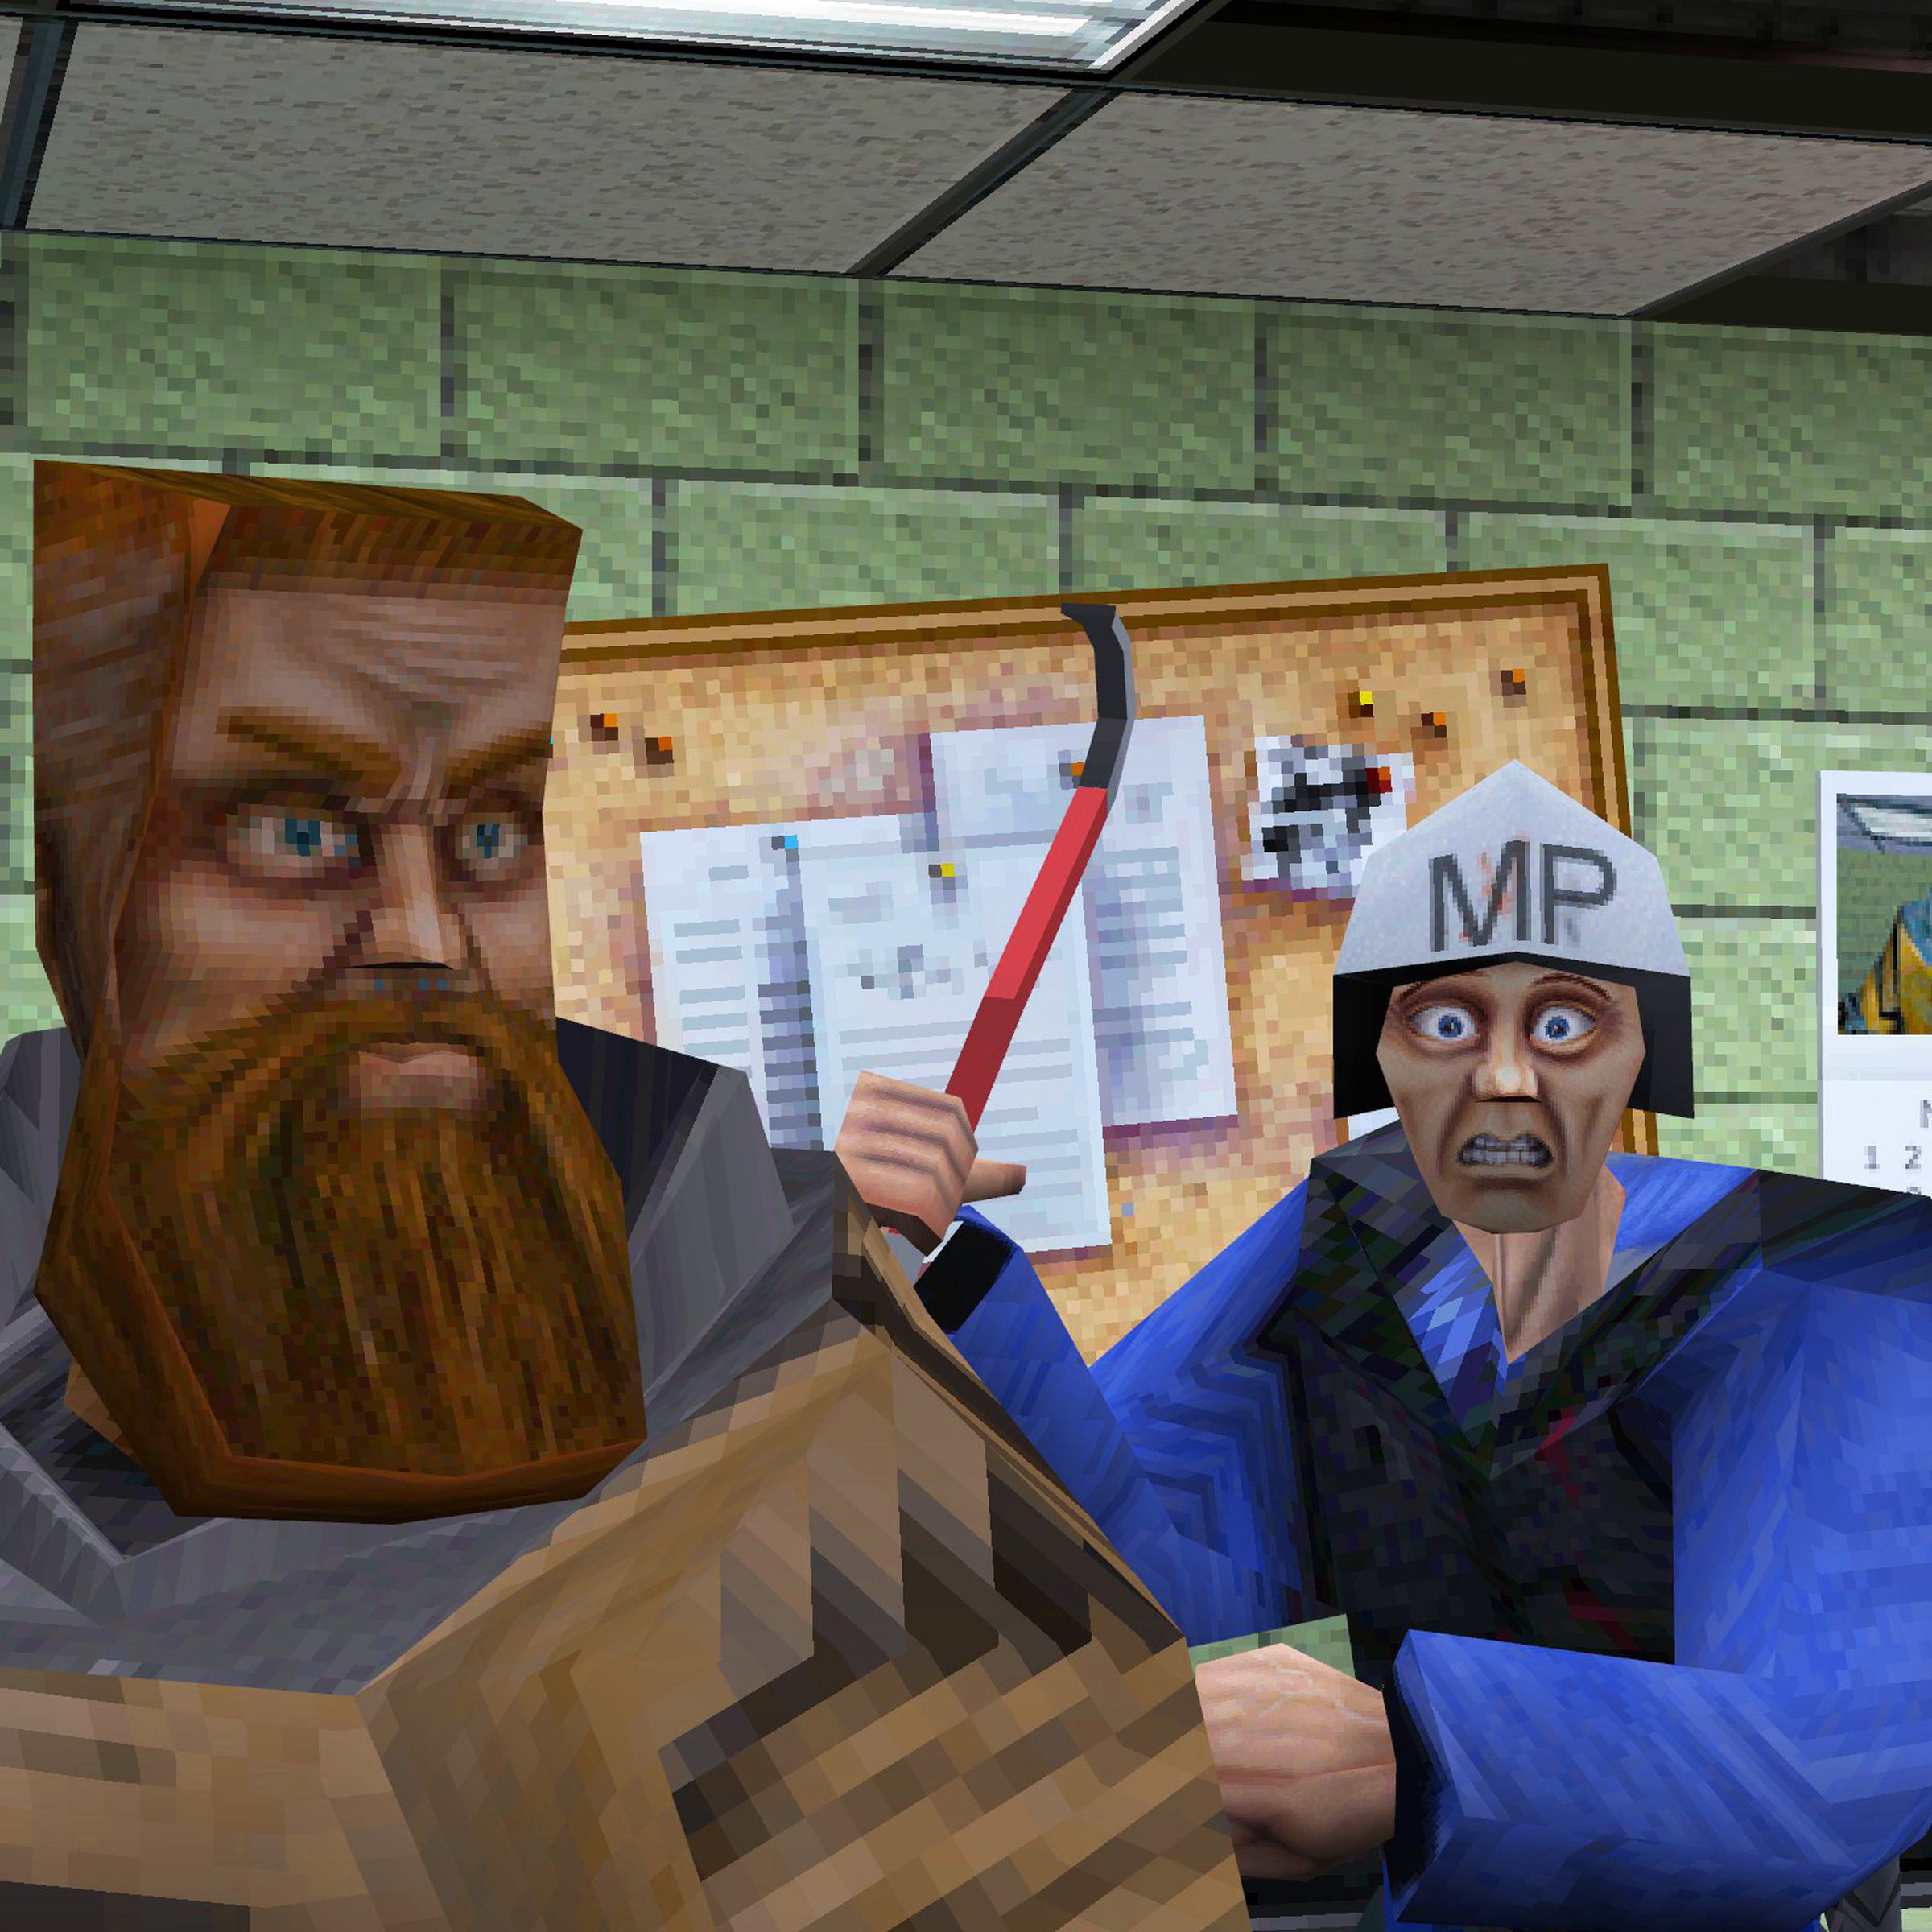 A screenshot from Half-Life featuring Ivan the Space Biker and Proto-Barney.